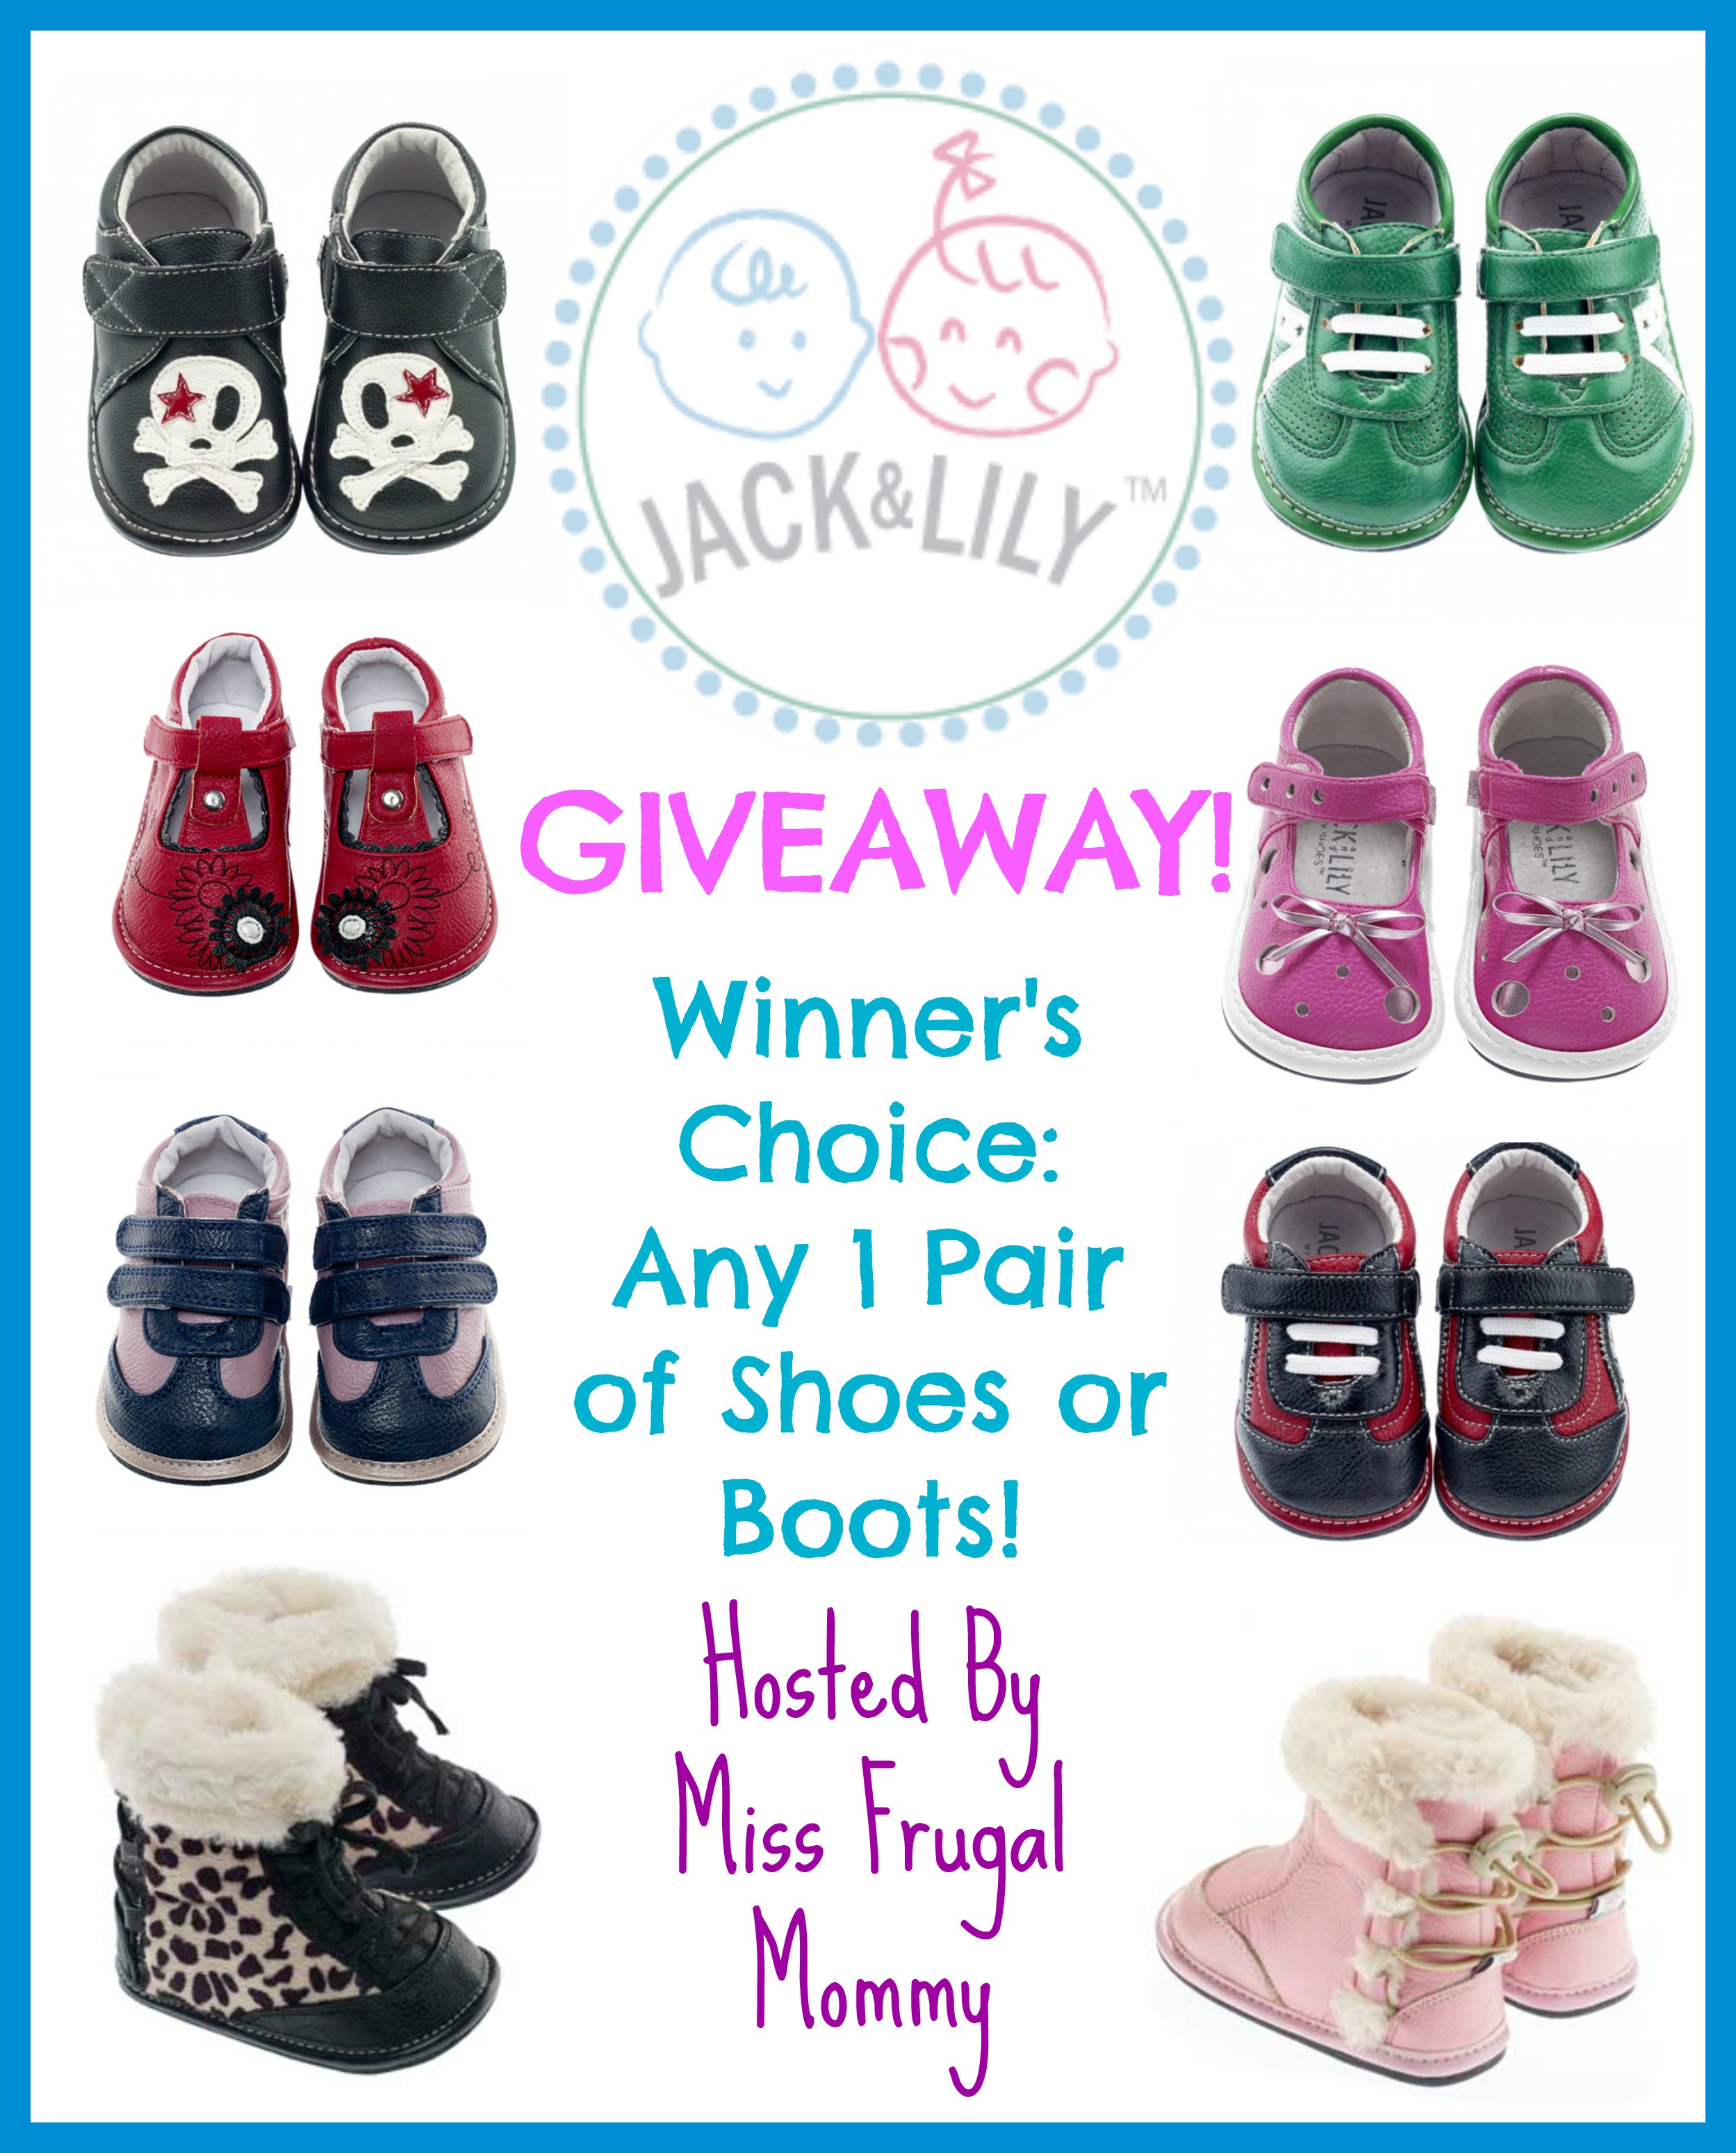 Jack & Lily Giveaway: Winner's Choice